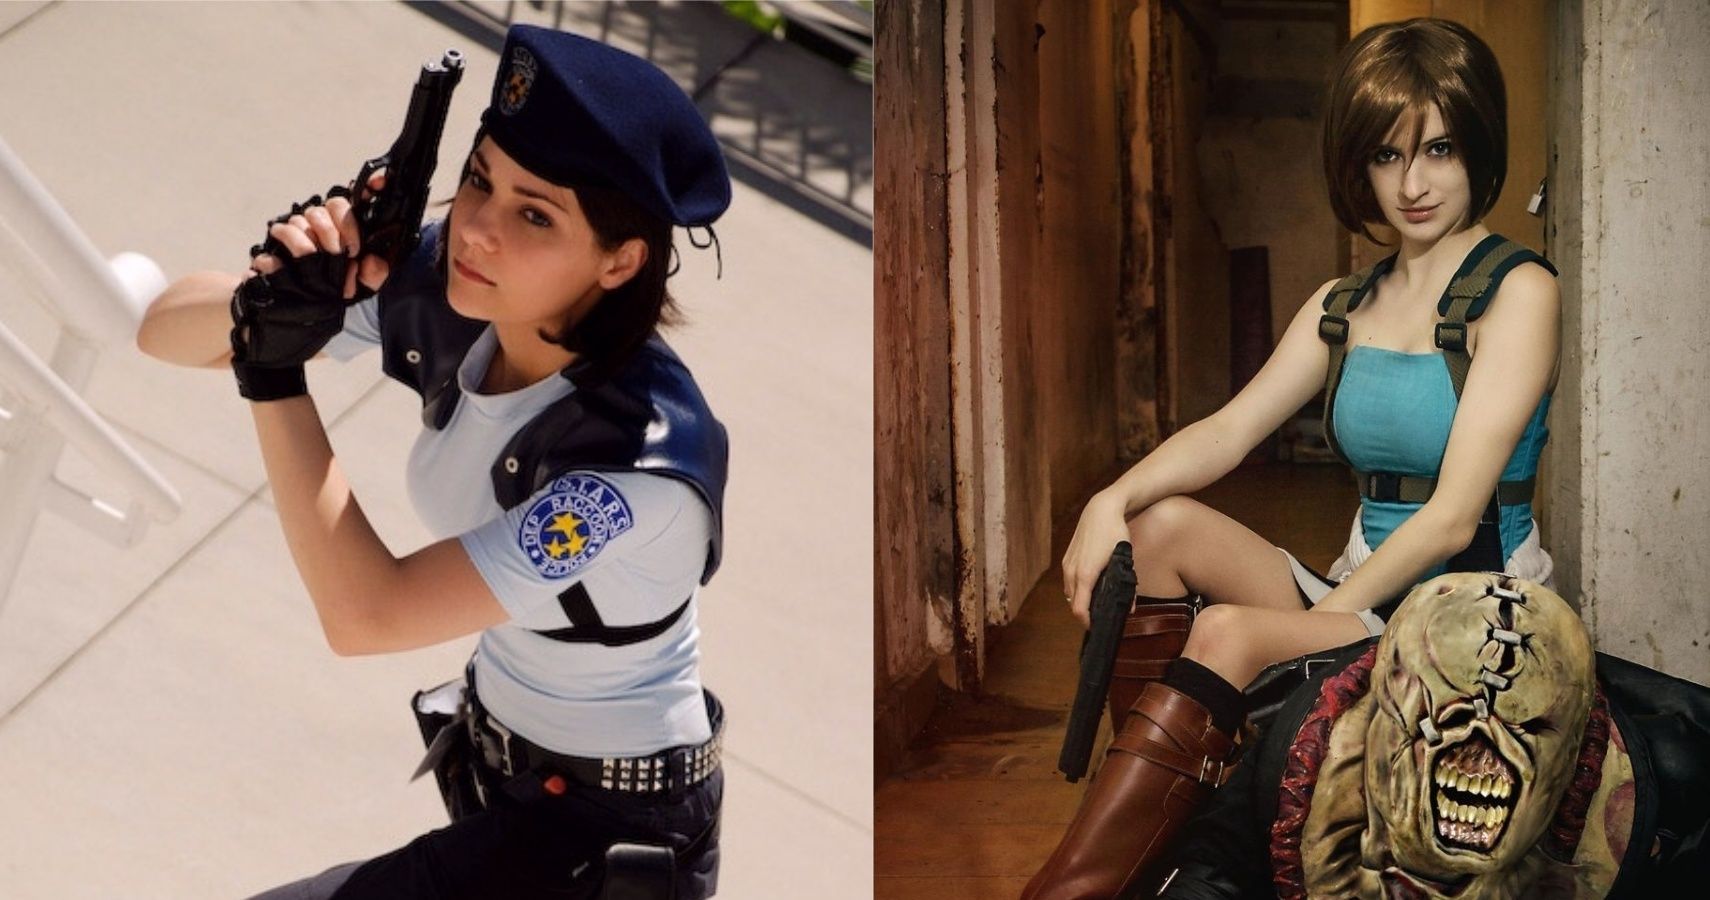 Jill Valentine Looks a Lot Different in Resident Evil 3 Remake